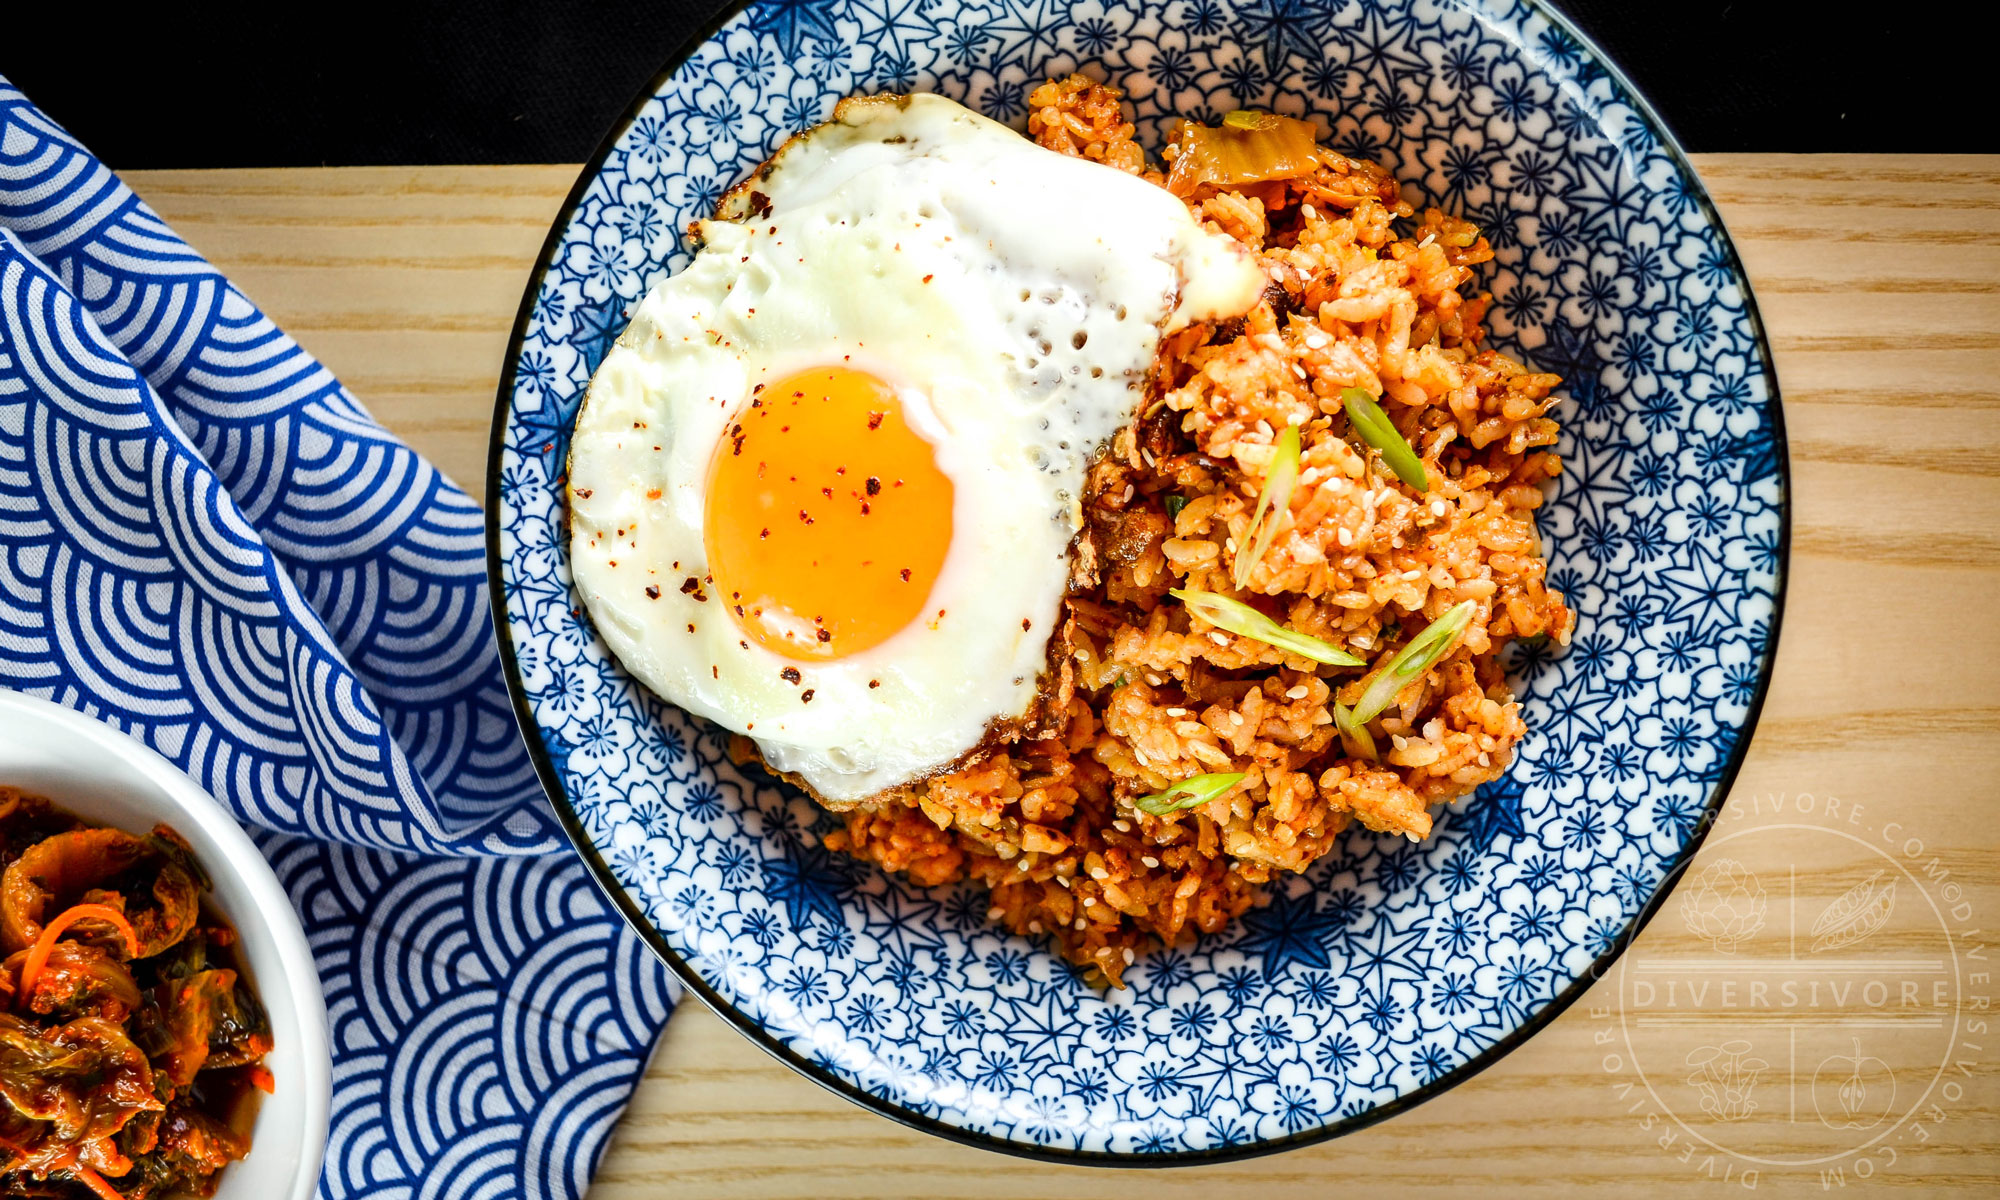 How many calories is in a cup of fried rice Kimchi Fried Rice Kimchi Bokkeumbap